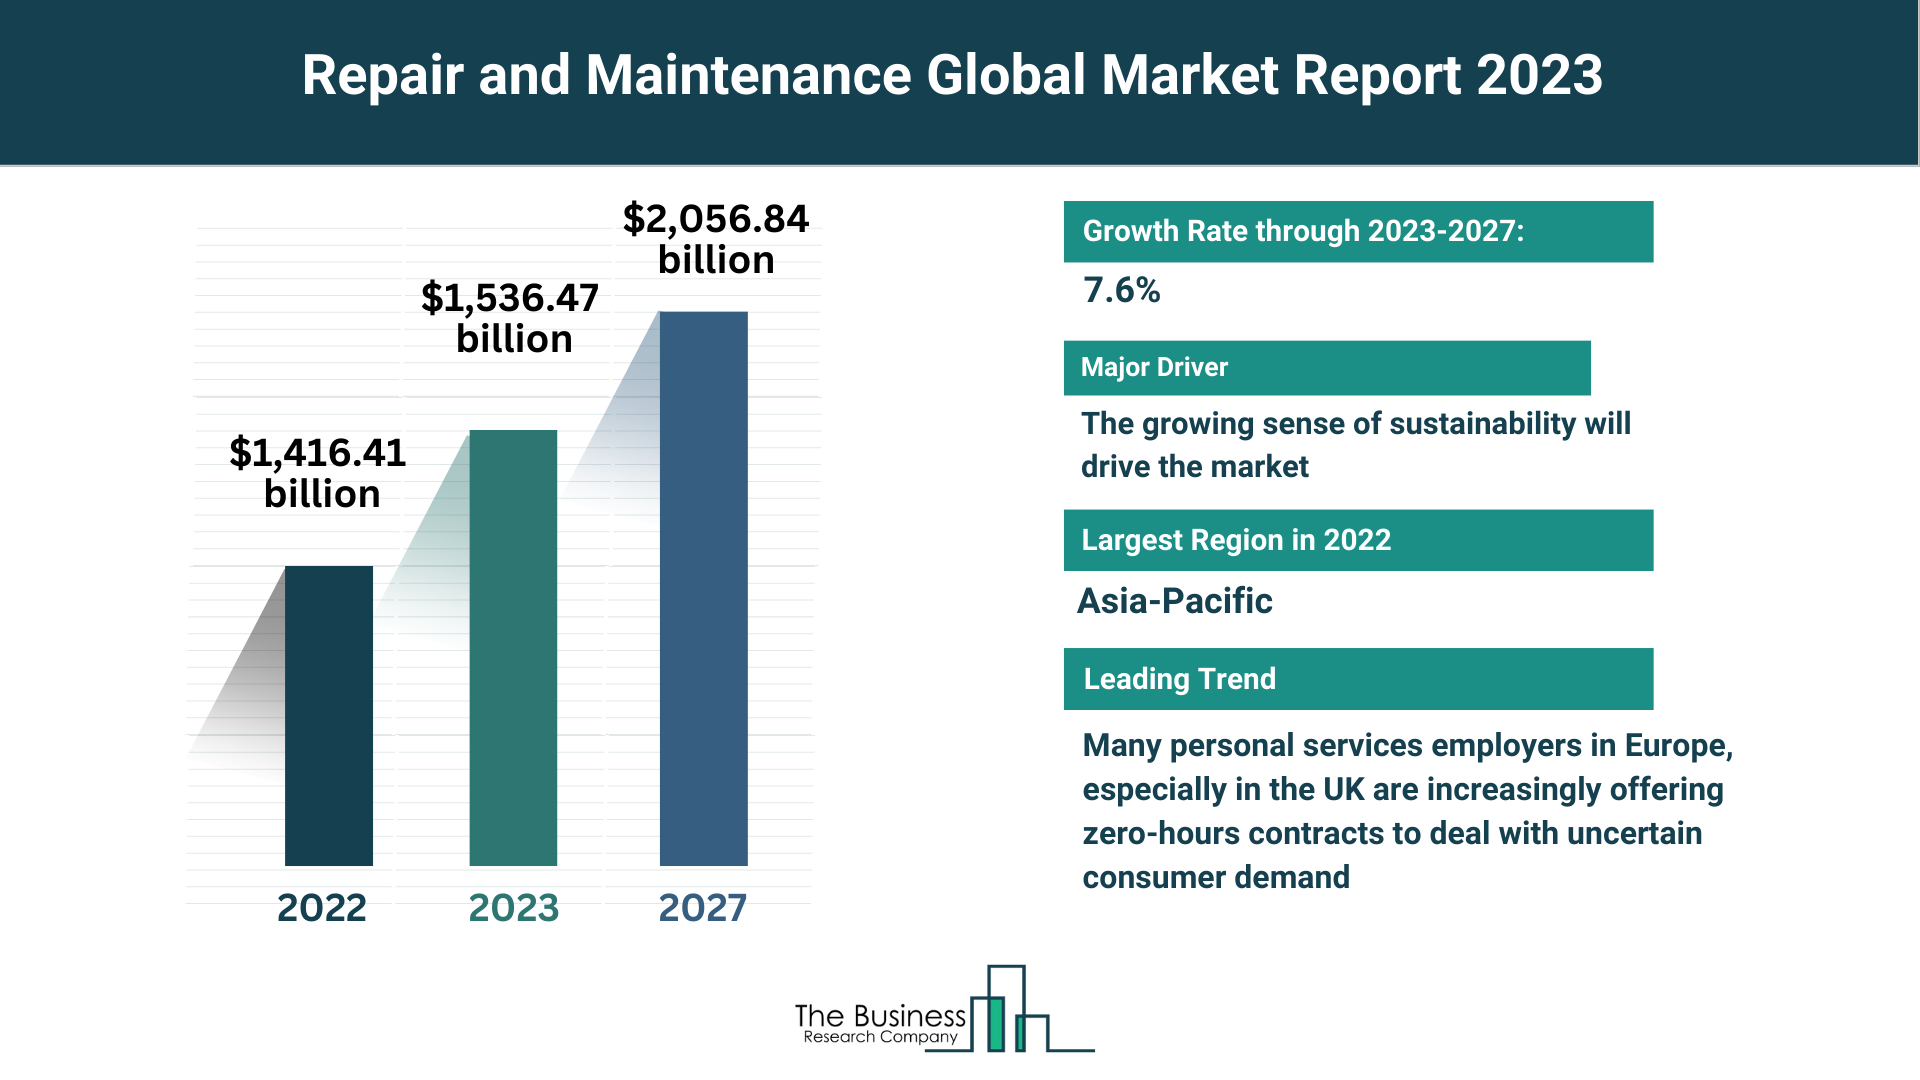 Understand How The Repair and Maintenance Market Is Set To Grow In Through 2023-2032